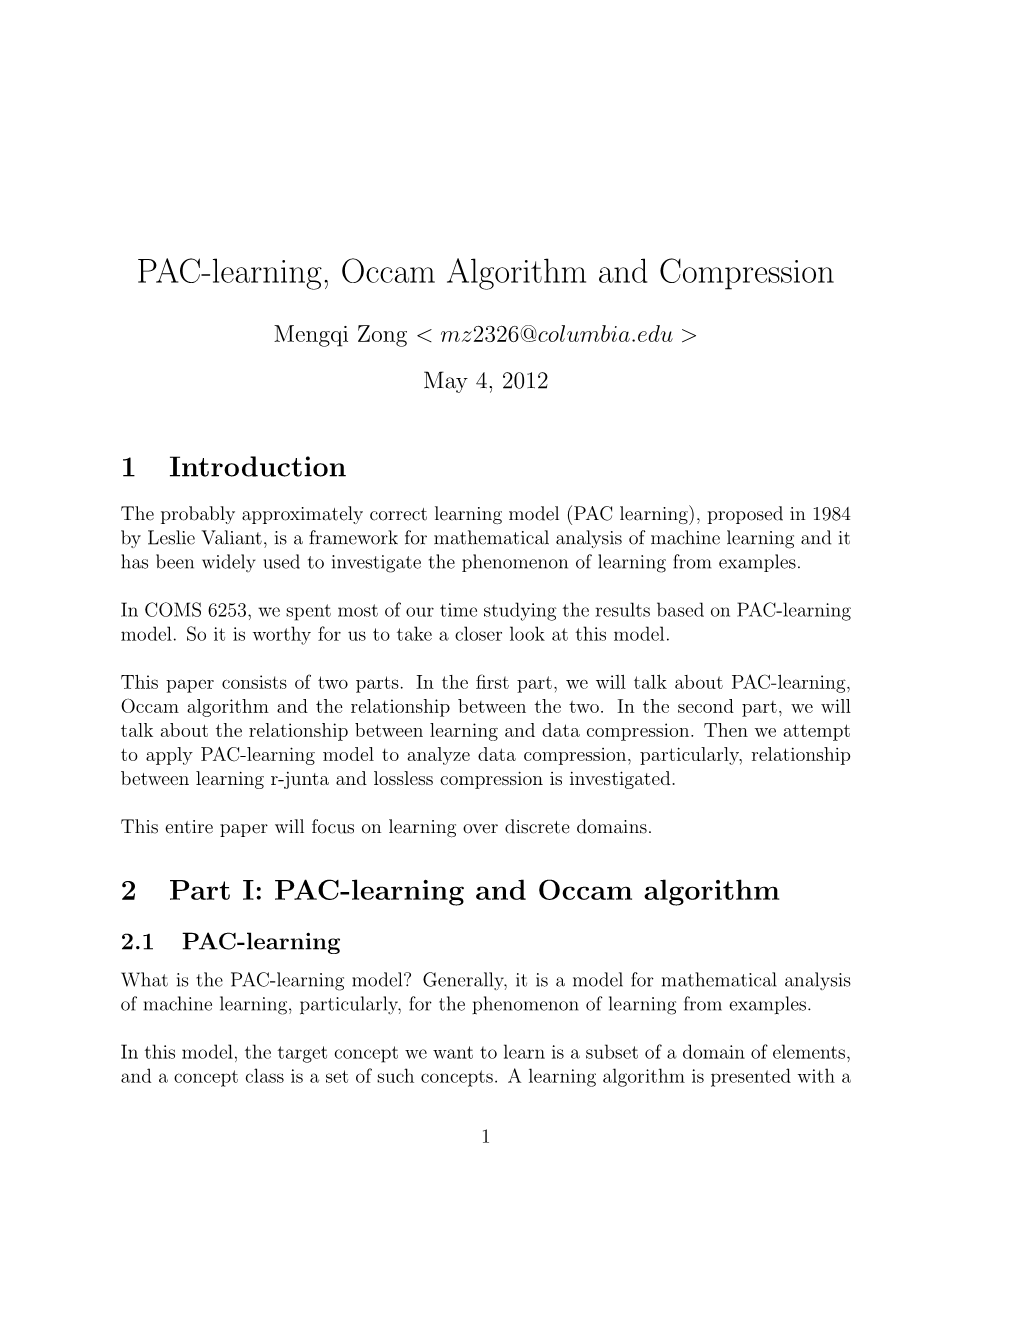 PAC-Learning, Occam Algorithm and Compression